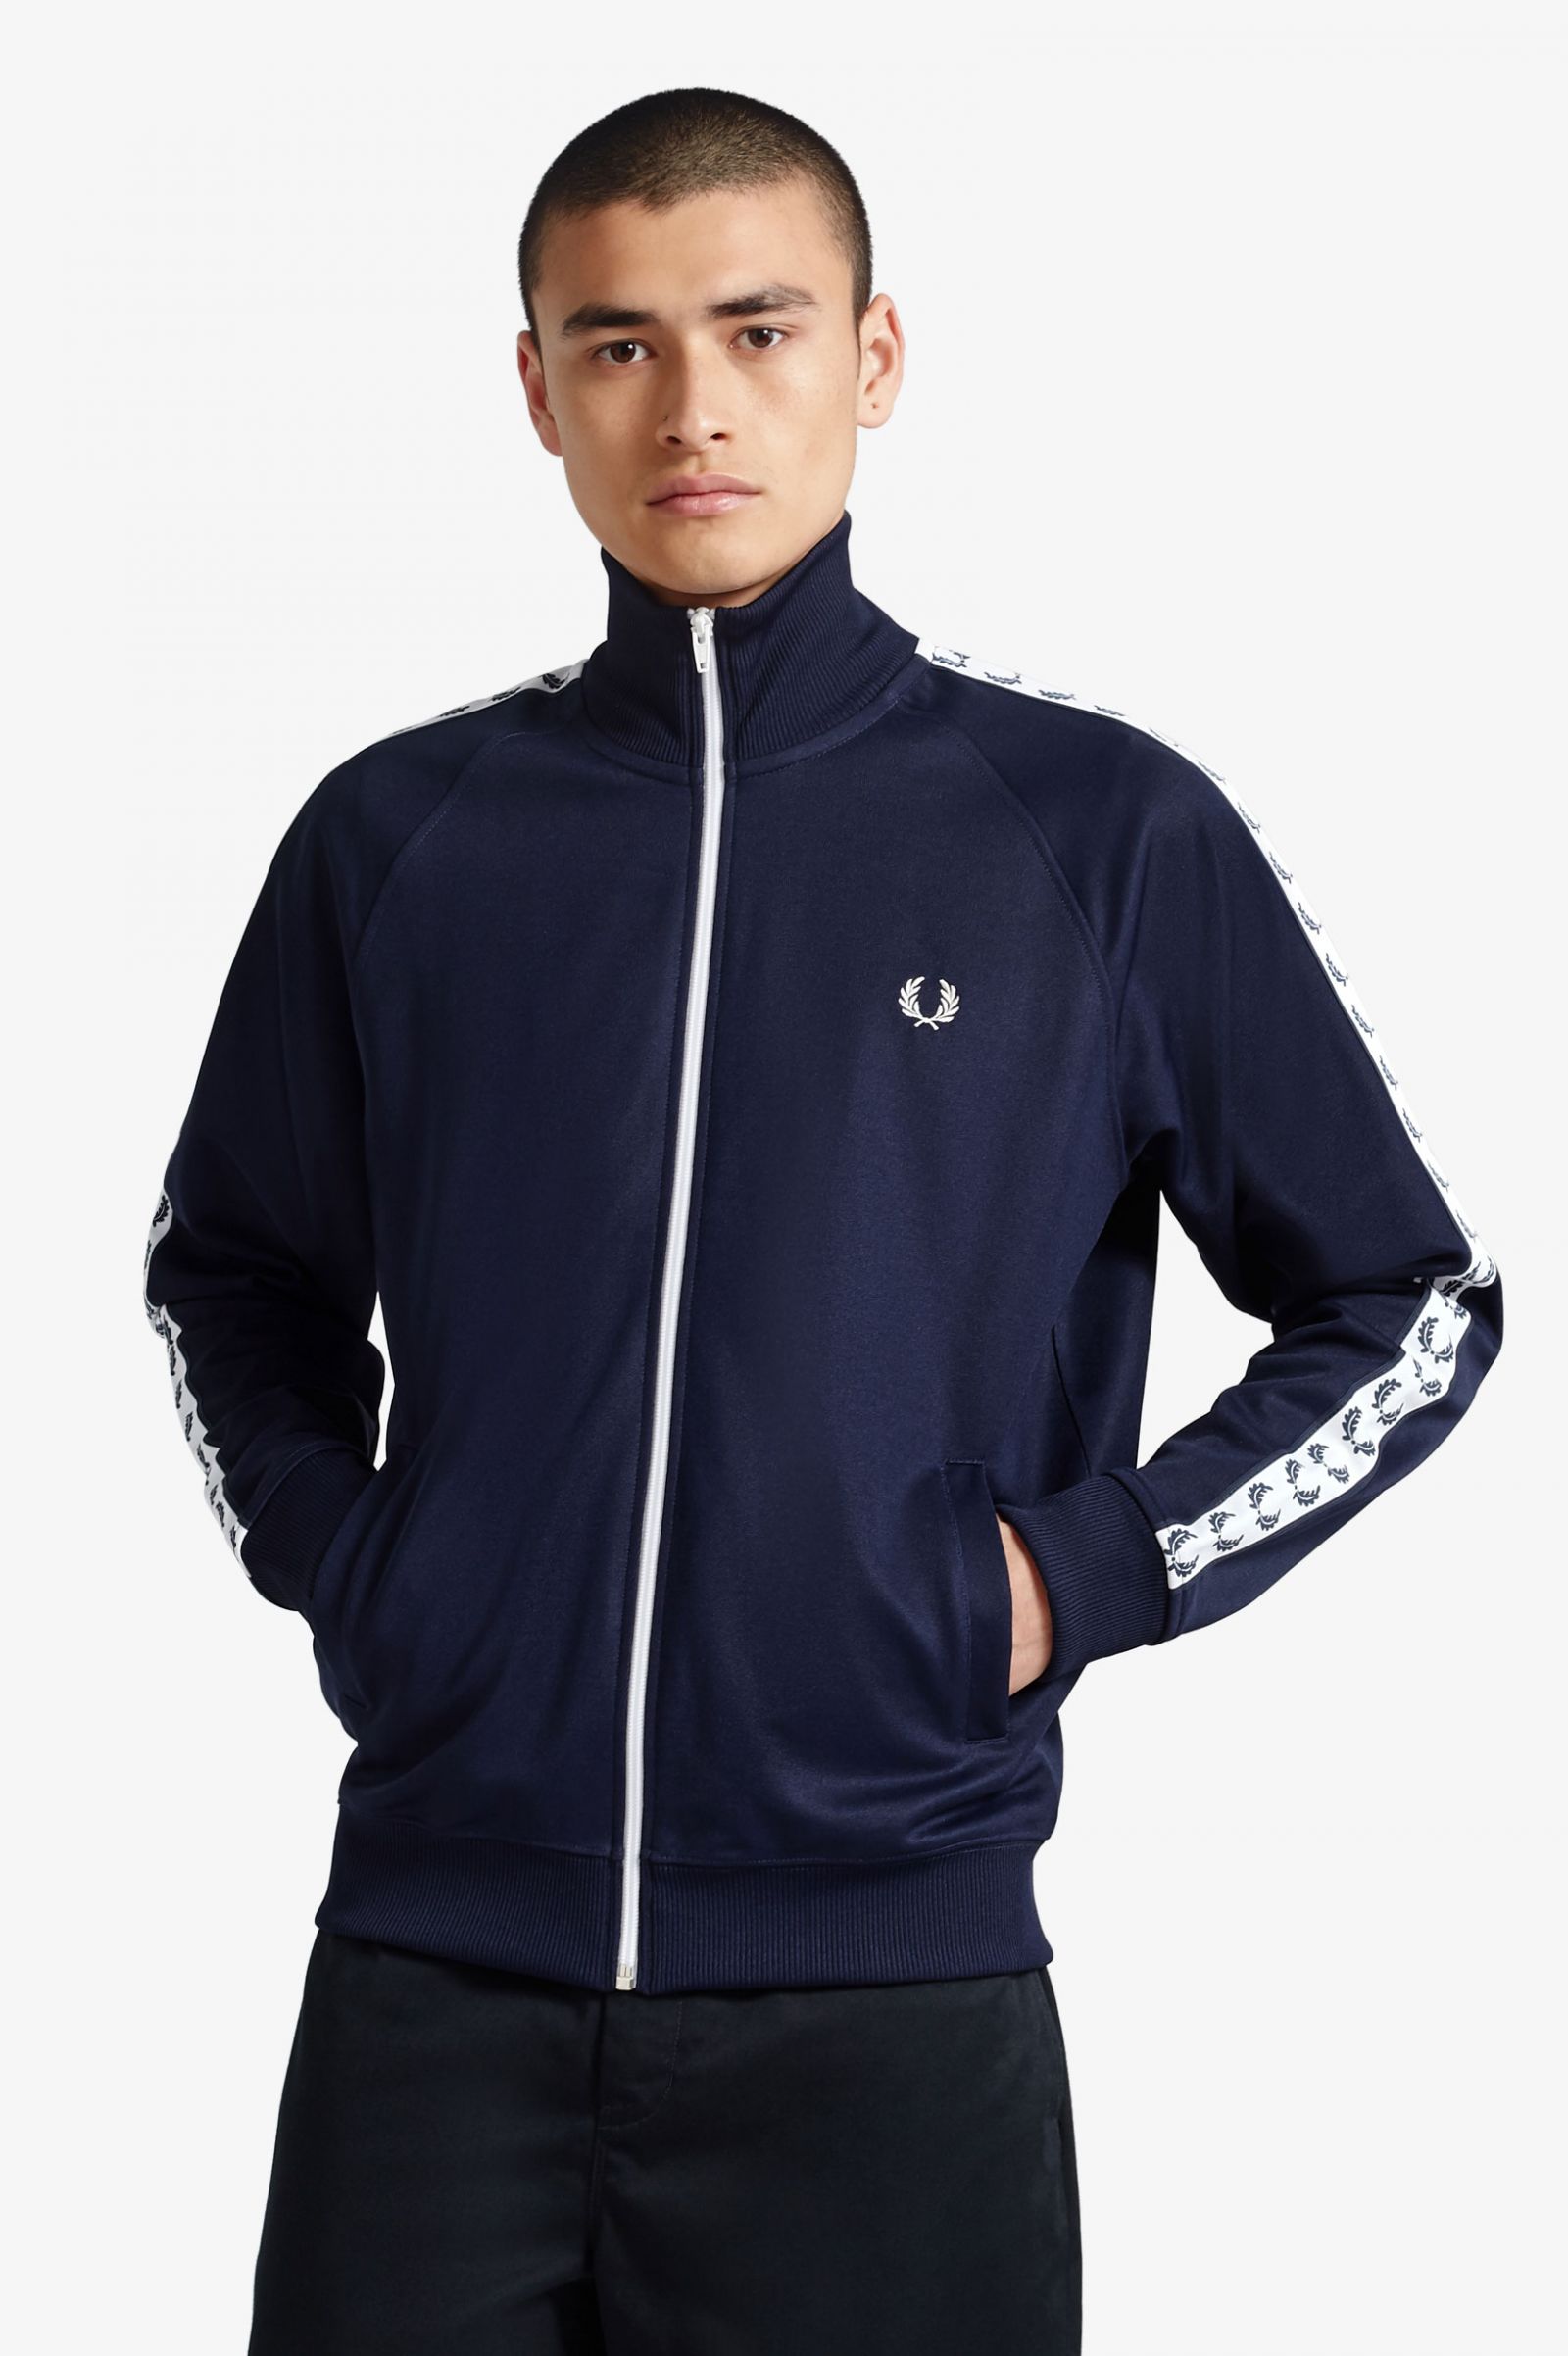 fred perry track jacket red